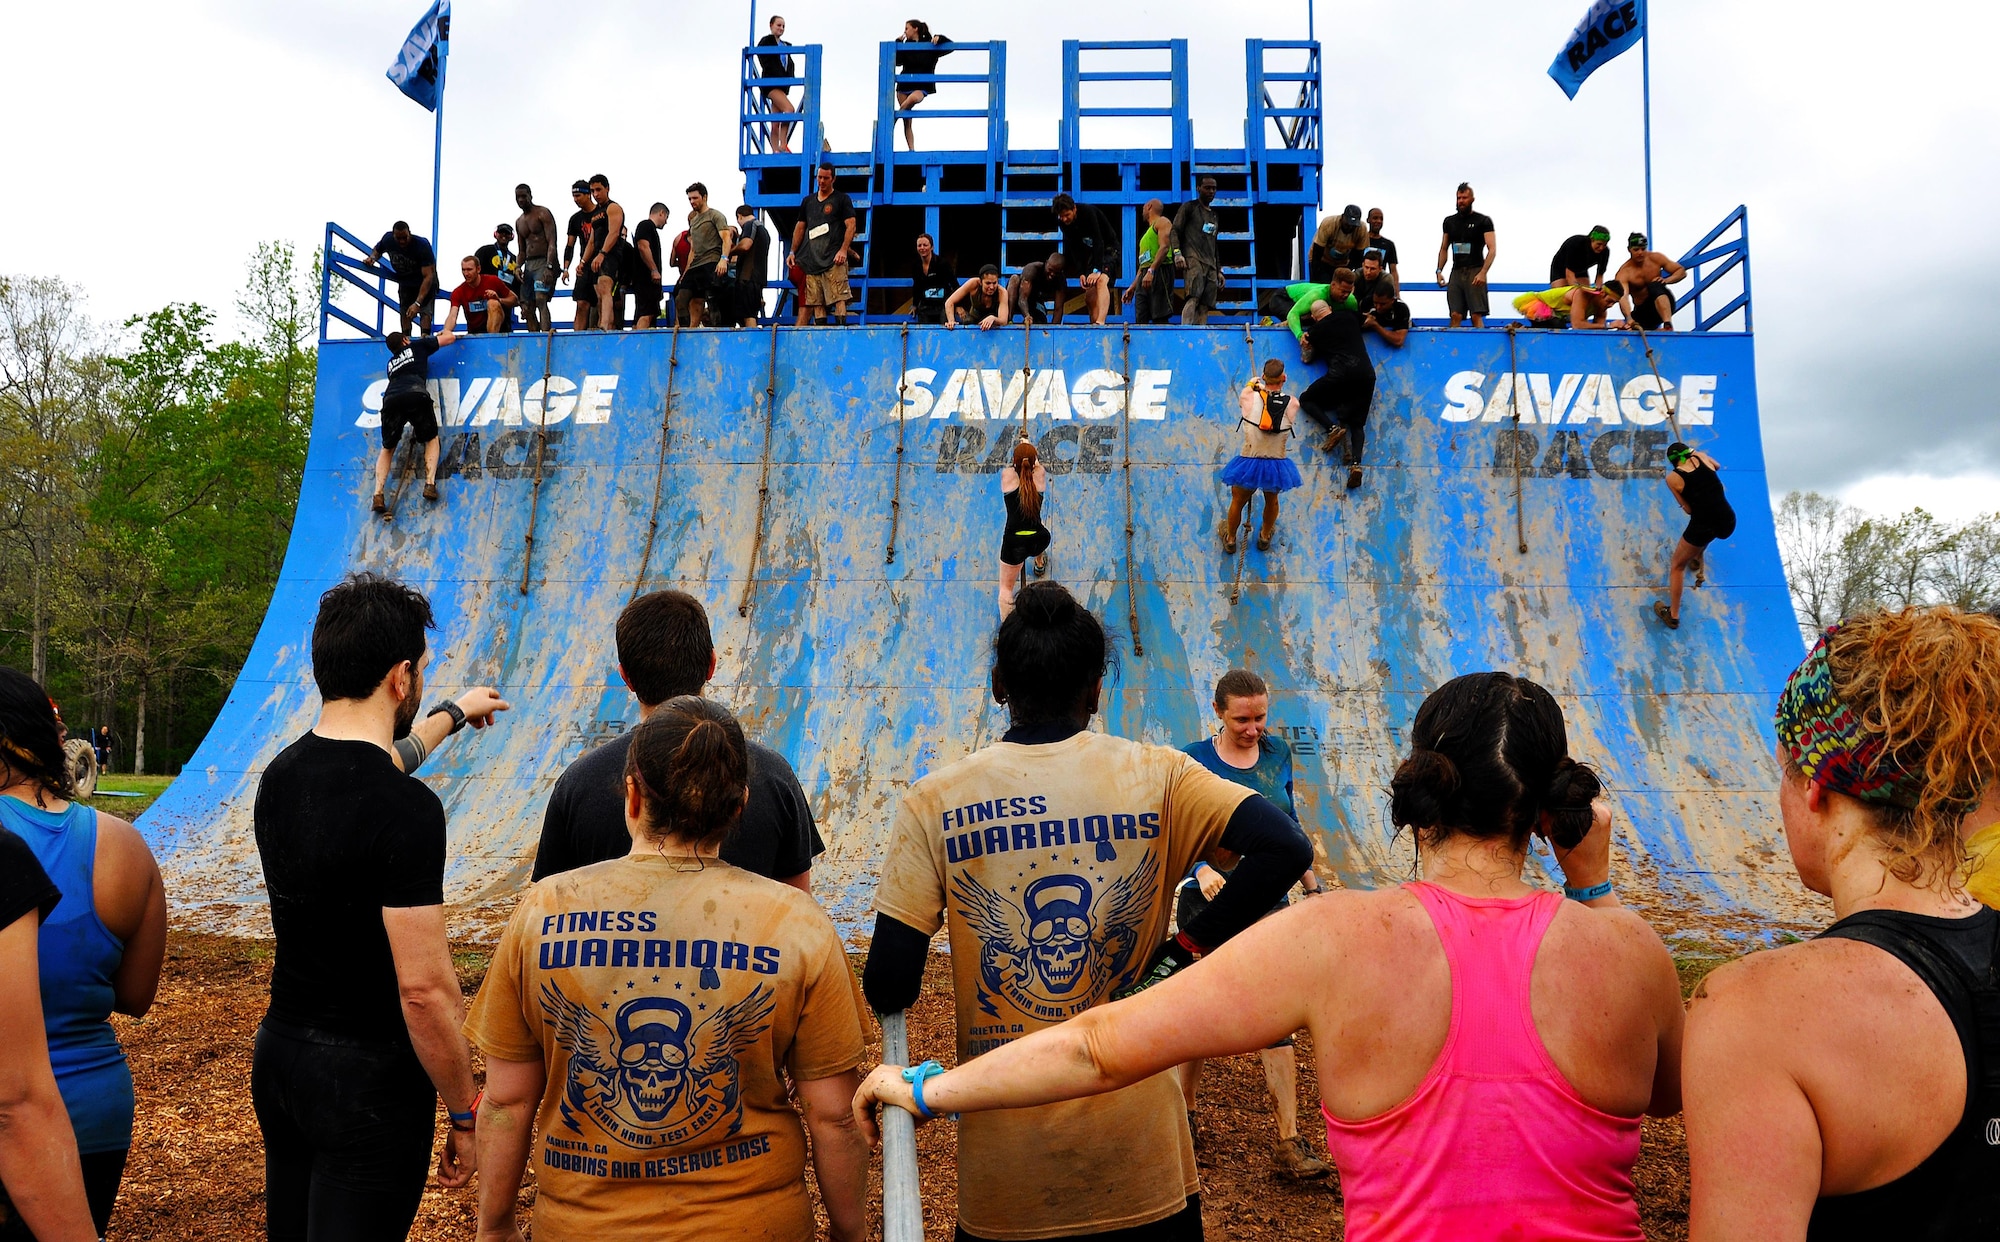 Savage Race participants wait in line to climb the Colossus during the Georgia Spring 2015 Savage Race in Dallas, Ga., April 18, 2015. The Colossus was a giant 43-foot wall and one of the hardest obstacles in the course. Adding to the difficulty of it being one of the final obstacles, runners had to sprint up the barrier after they’d already sledged through more than four miles in the mud, before grabbing a rope. They would then pull themselves up to the top of the fortification. The Savage Race is an Air Force Reserve sponsored obstacle course that challenges participants in more than 20 different trials over the course of five miles. (U.S. Air Force photo/Senior Airman Daniel Phelps)